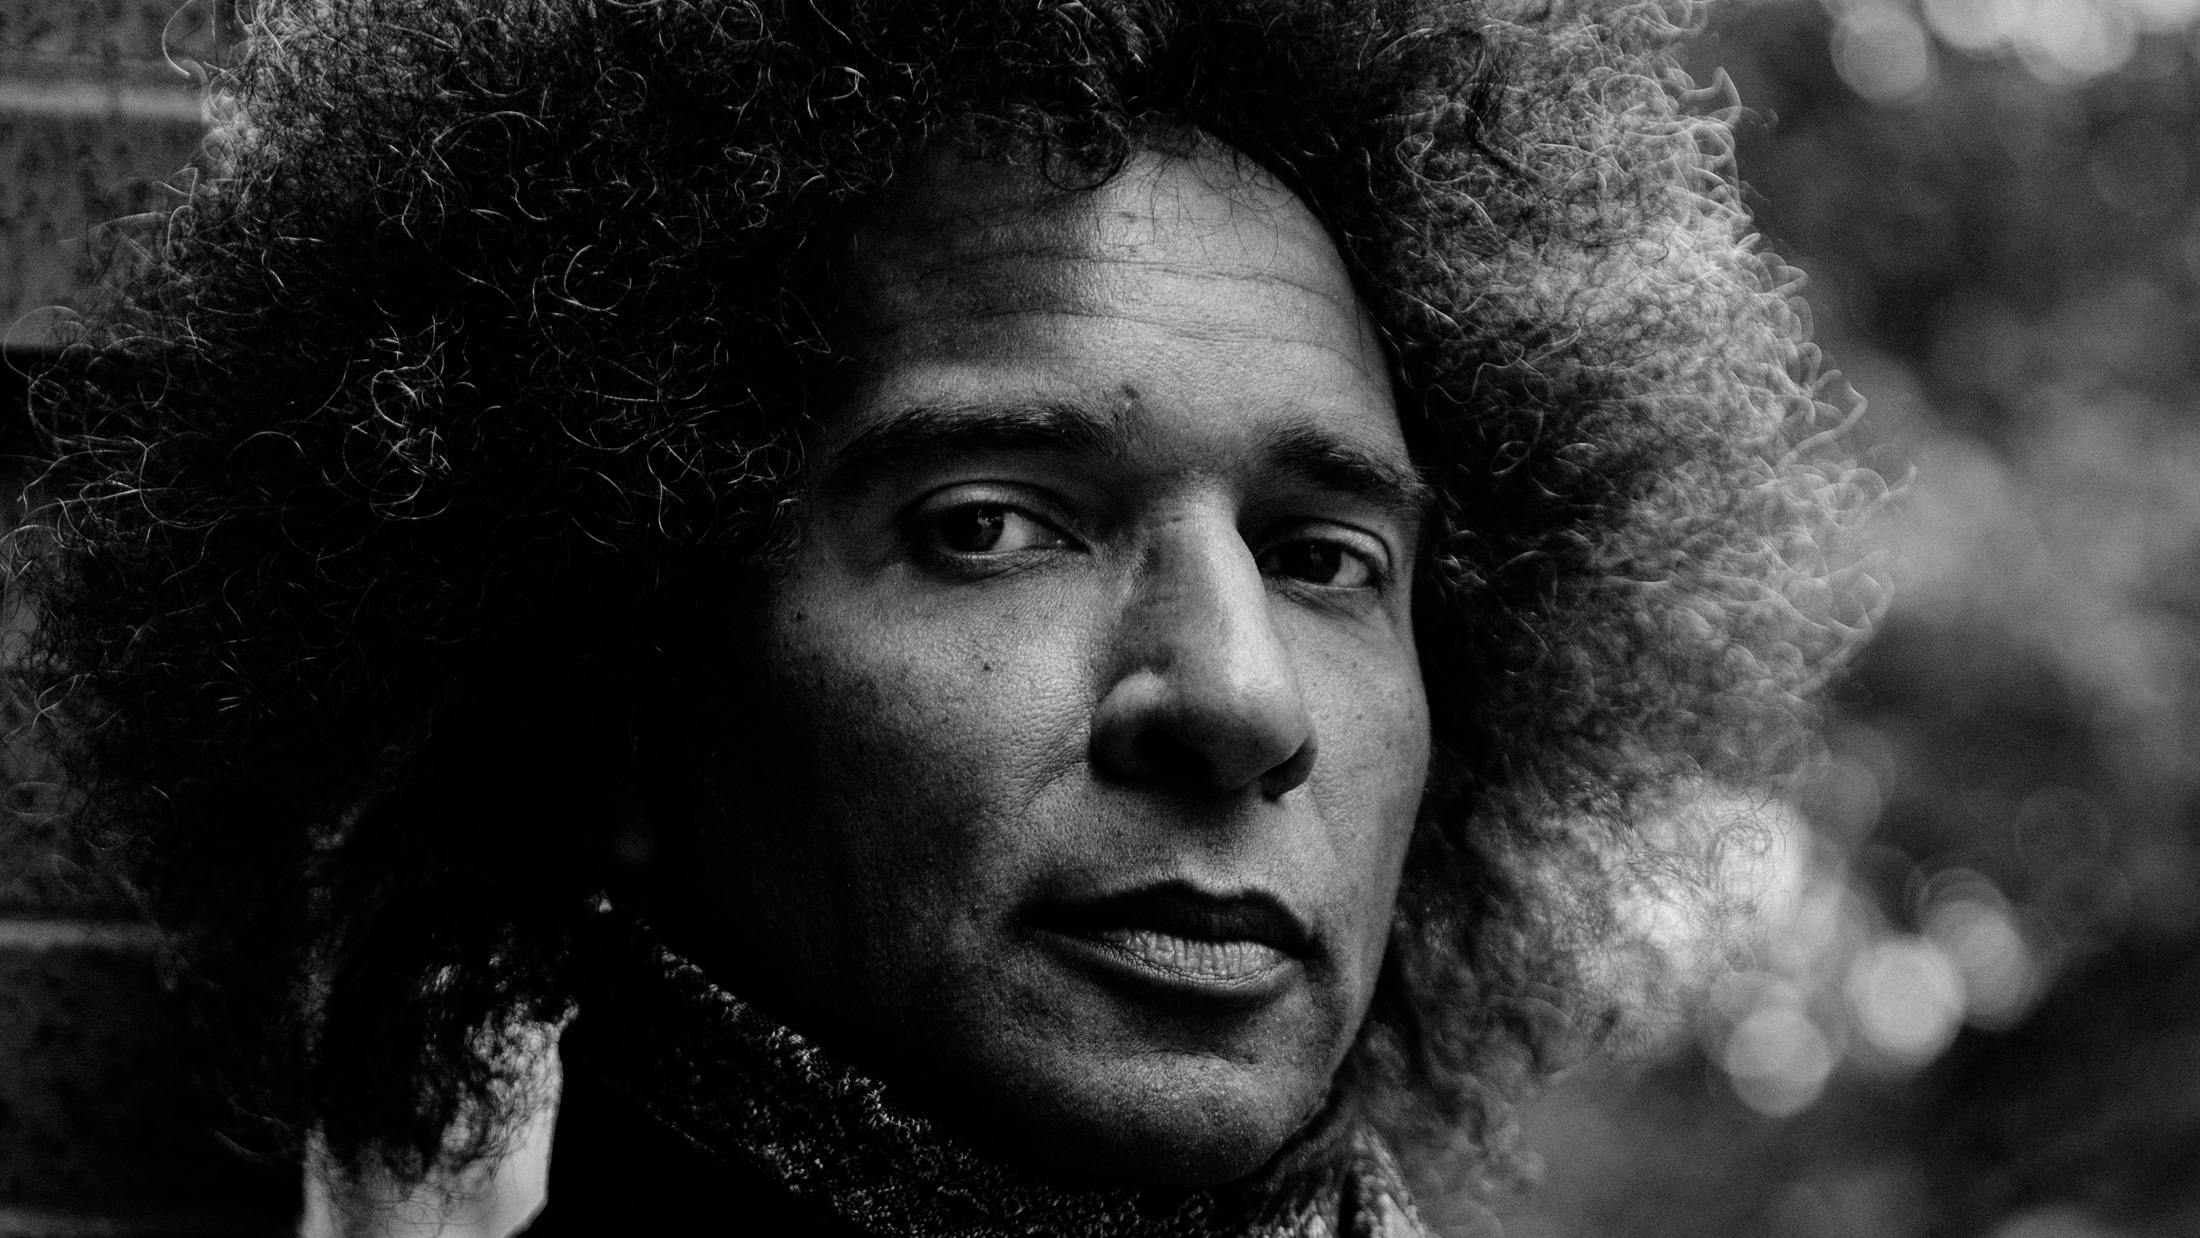 Alice In Chains' William DuVall: "Nothing prepares you for your gigs being invaded, or for Nazi skinheads putting a contract out on you"